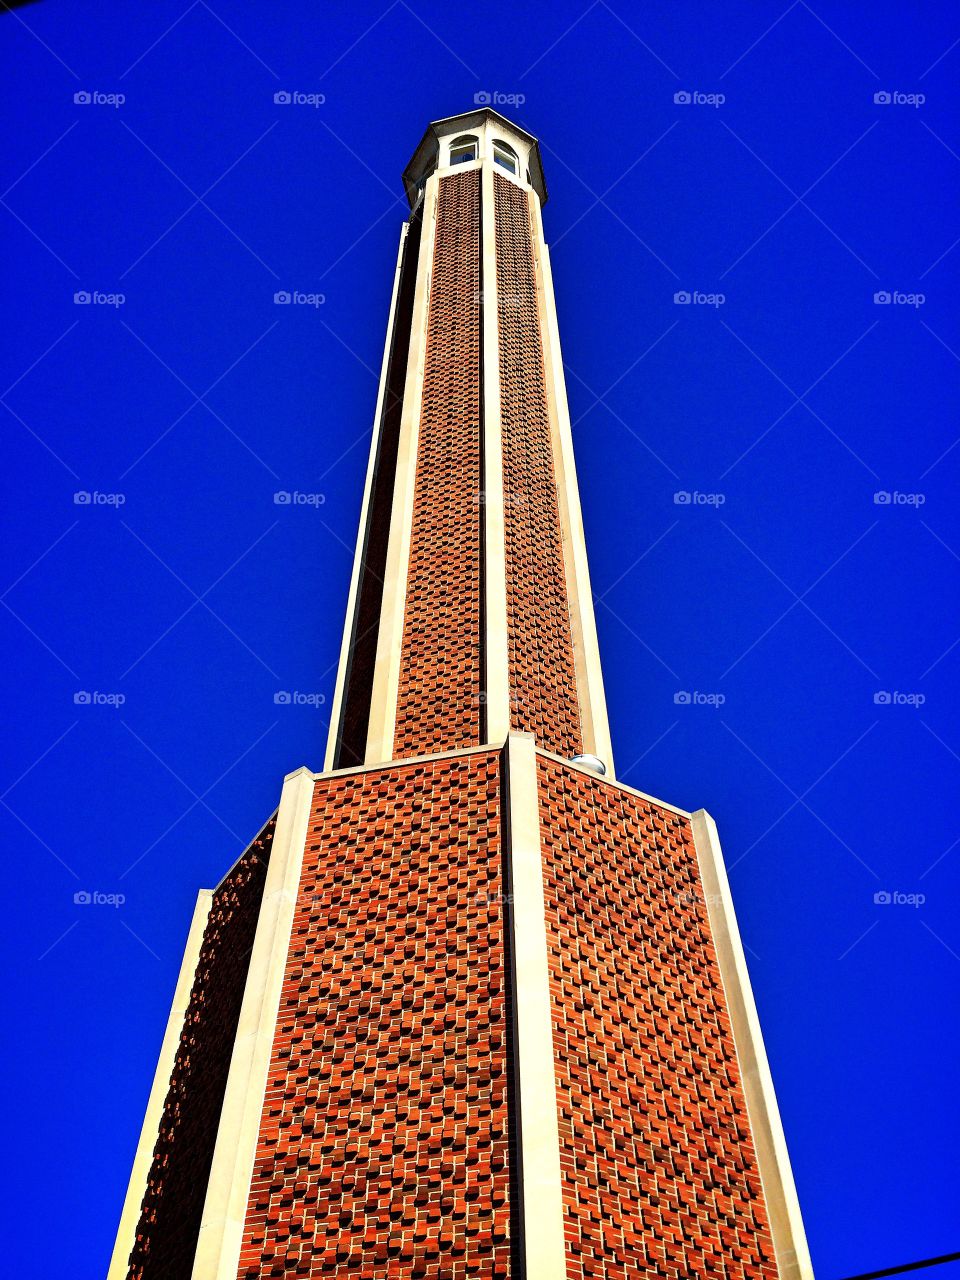 Tall structure against blue sky